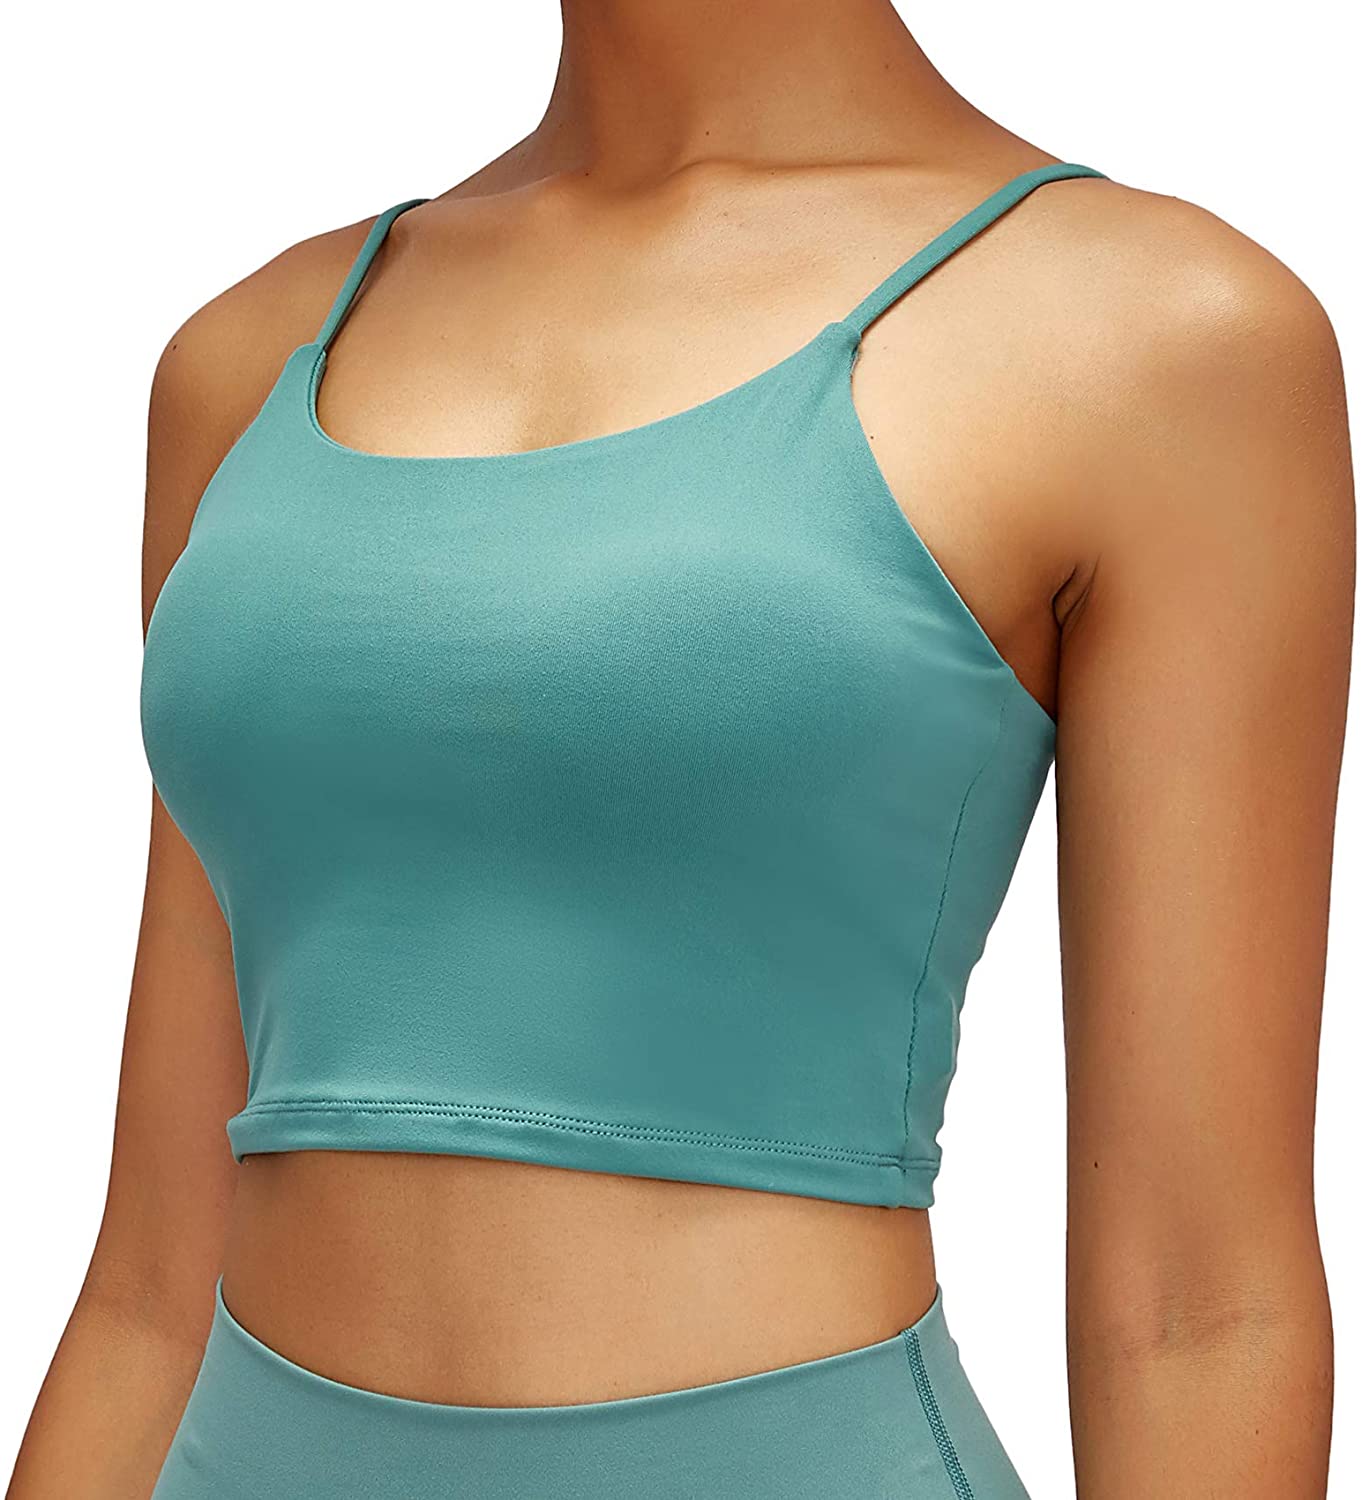 NEW Lemedy Padded Sports Bra Fitness Workout Running Tank Top Size Small